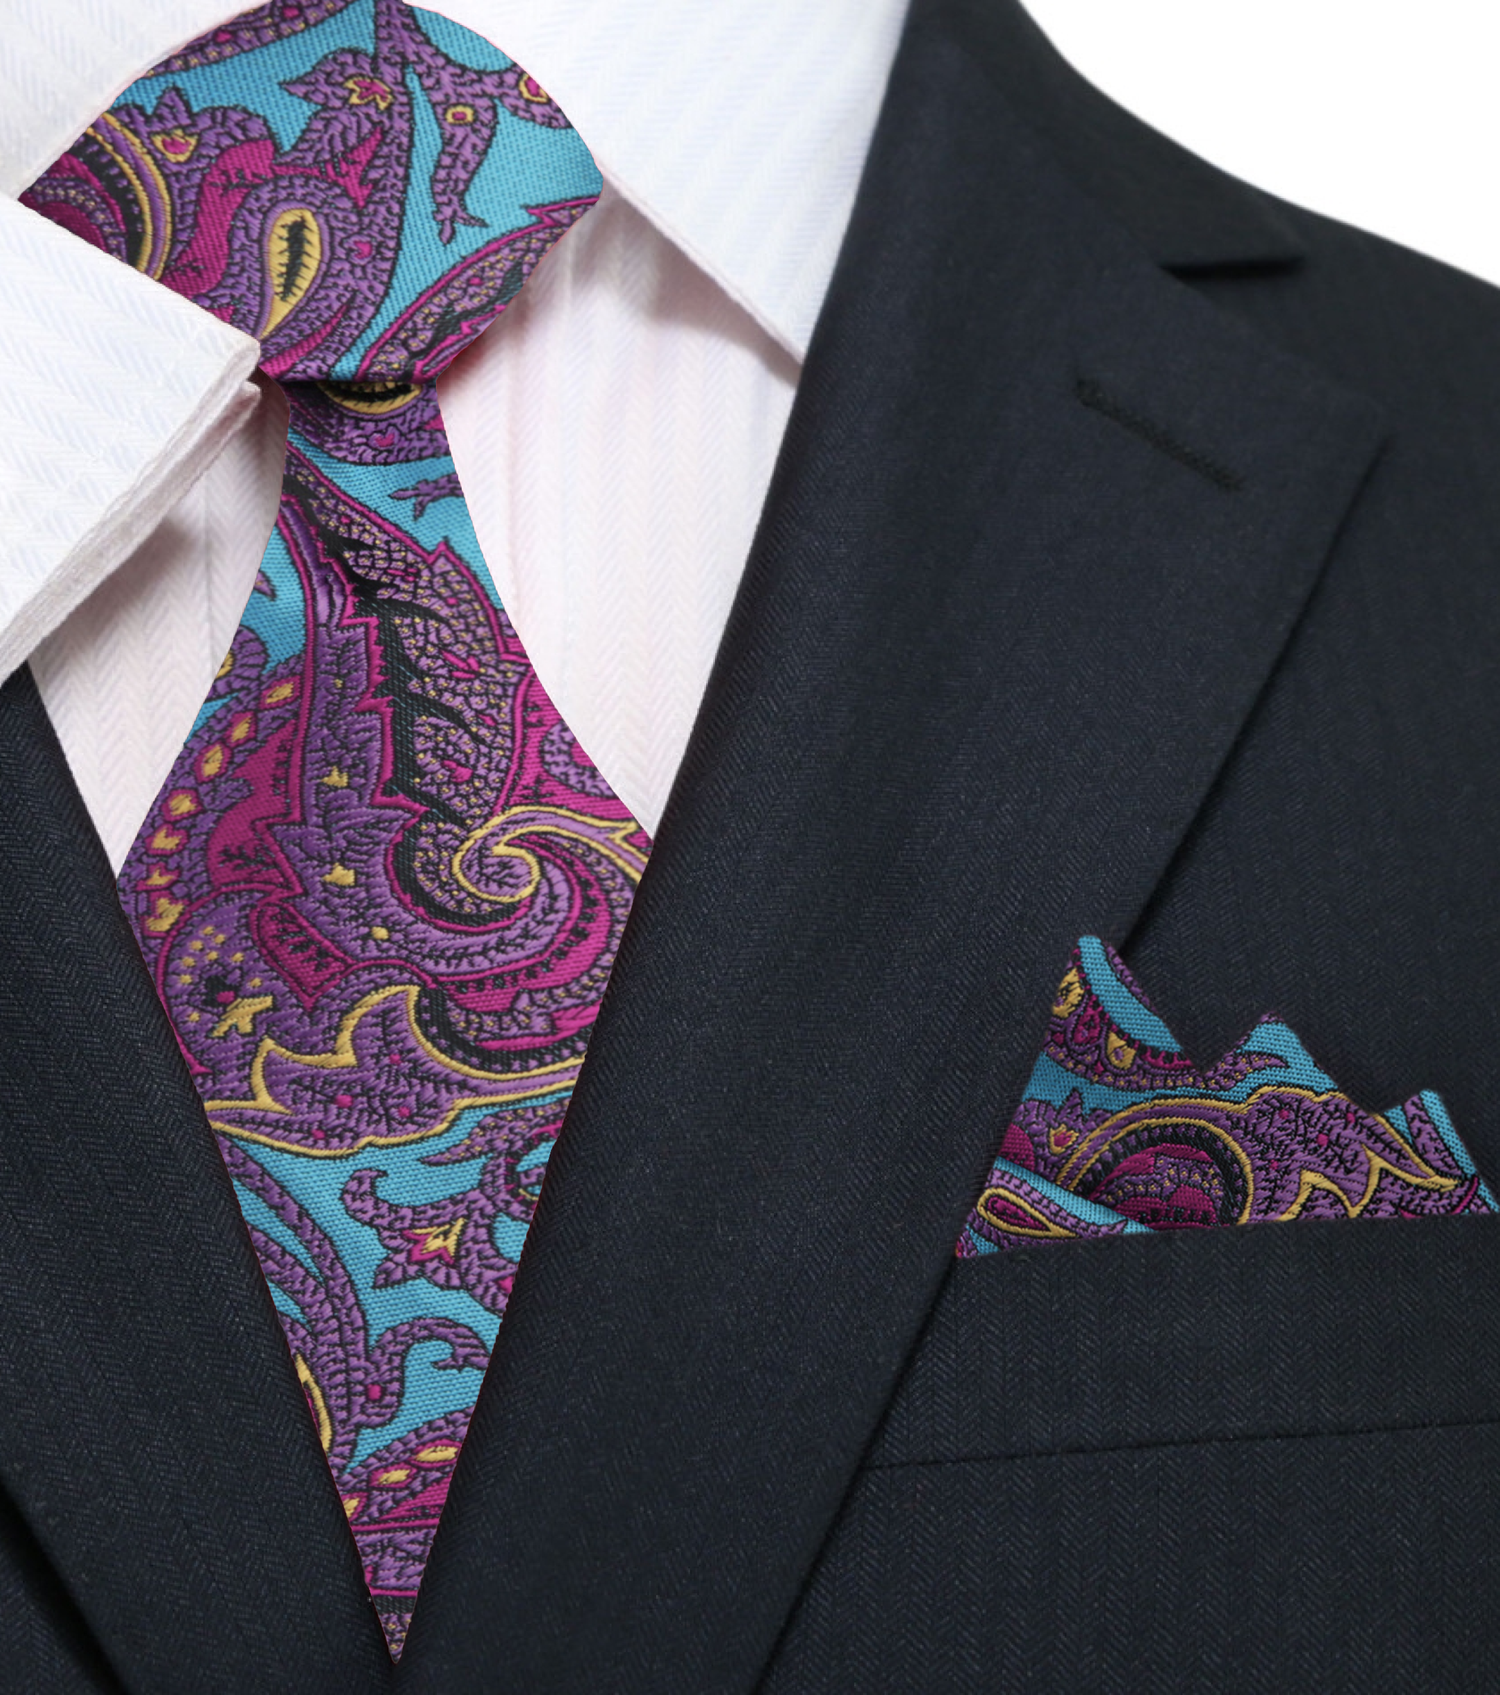 A Teal, Purple Intricate Paisley Pattern Necktie, Matching Pocket Square